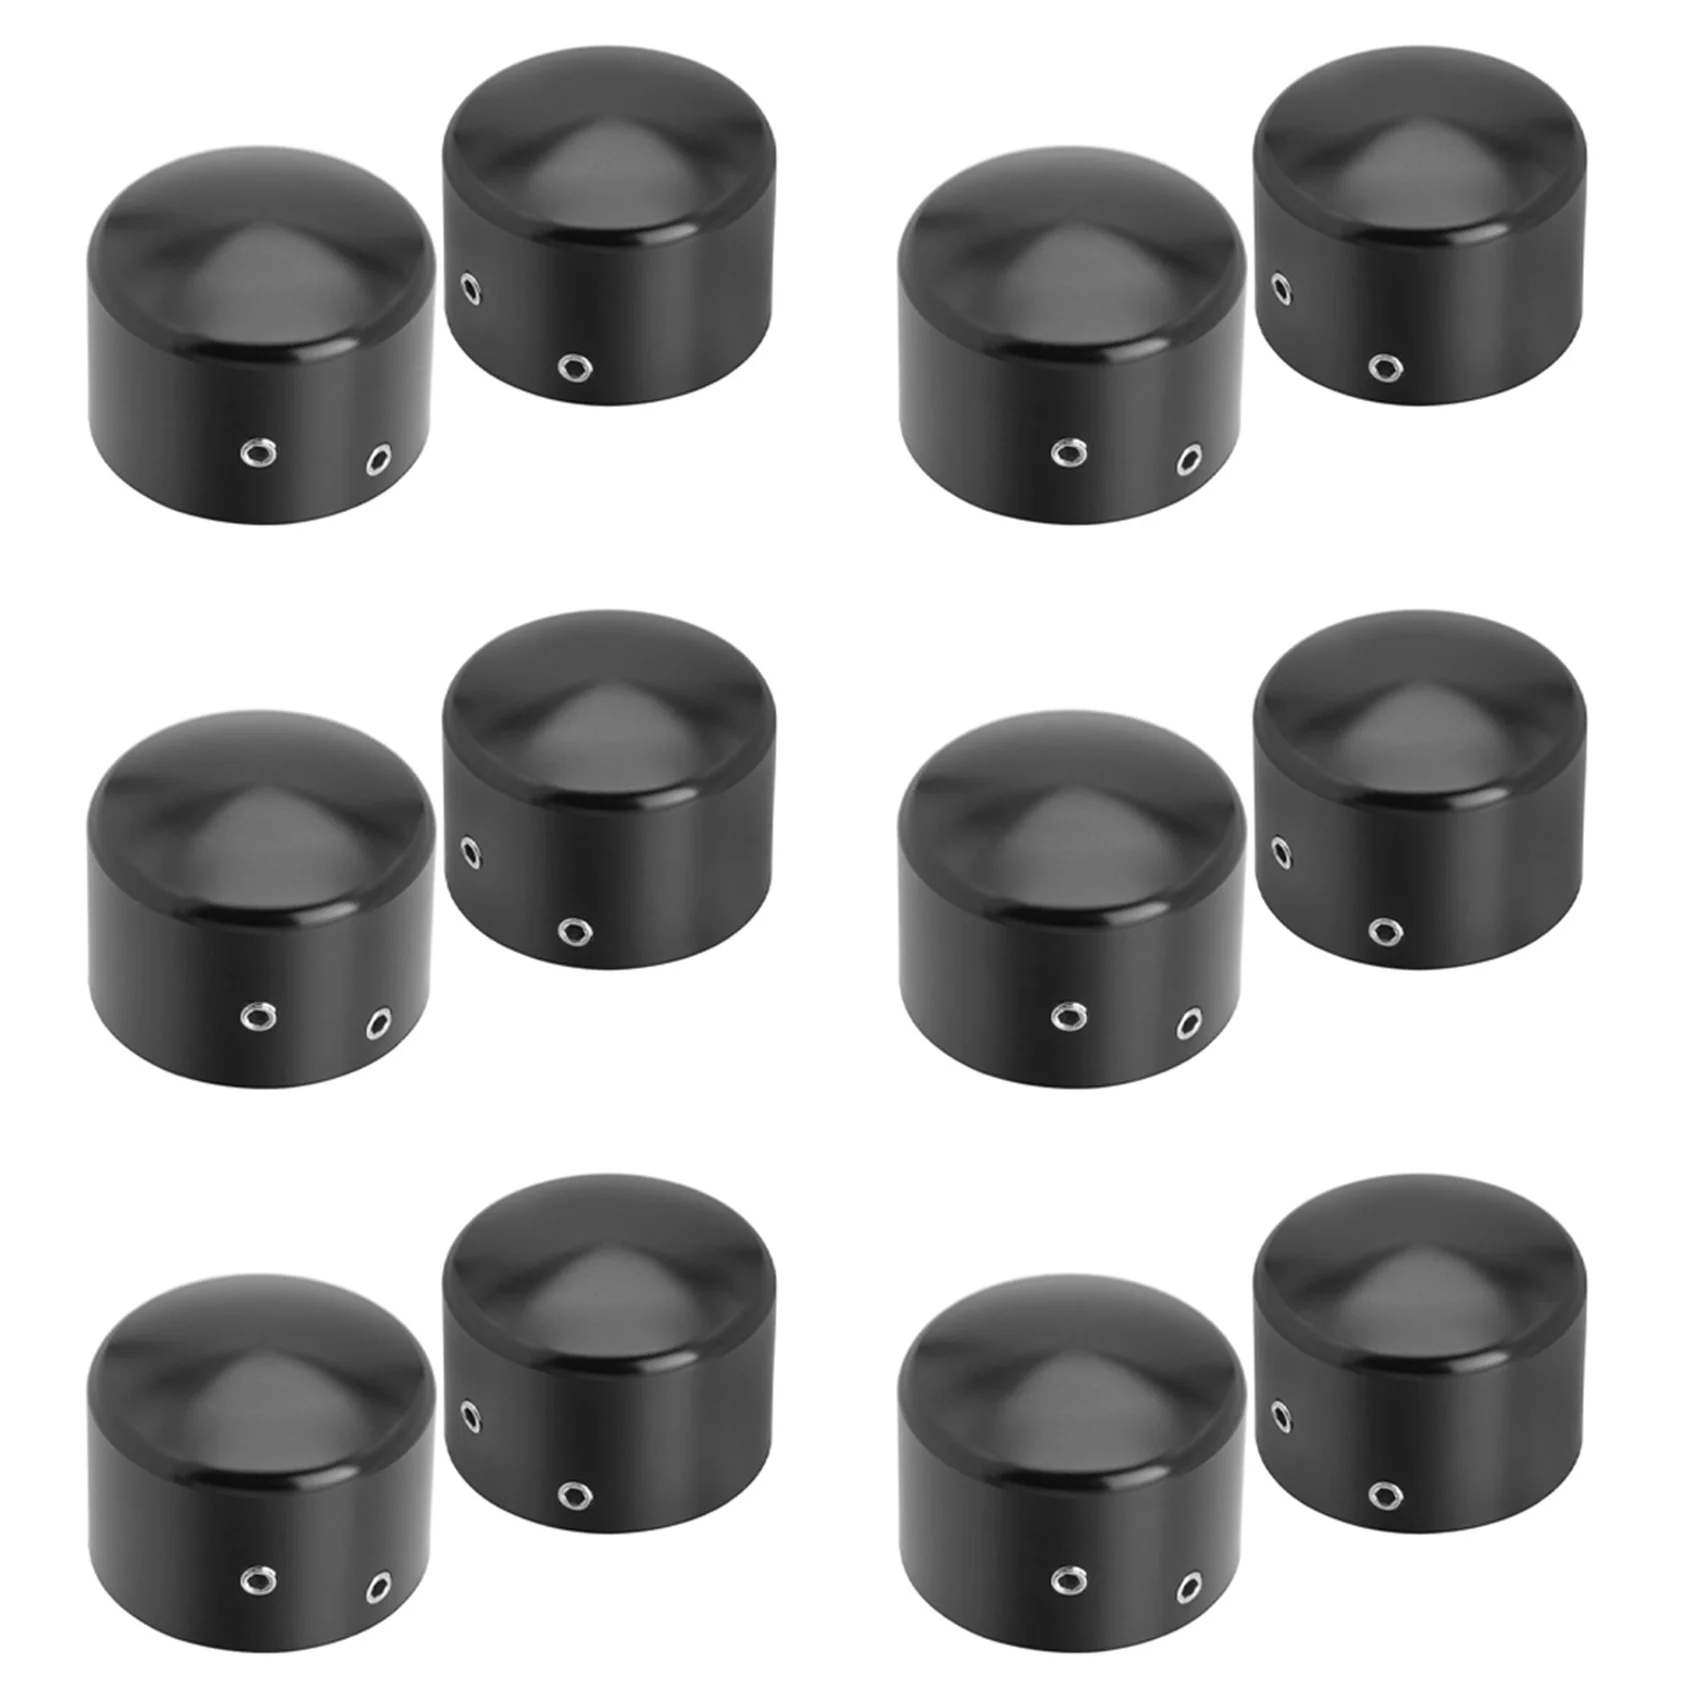 

6 Pair Black Front Axle Nut Cover Cap for Softail Sportster Dyna Road King Vrod King